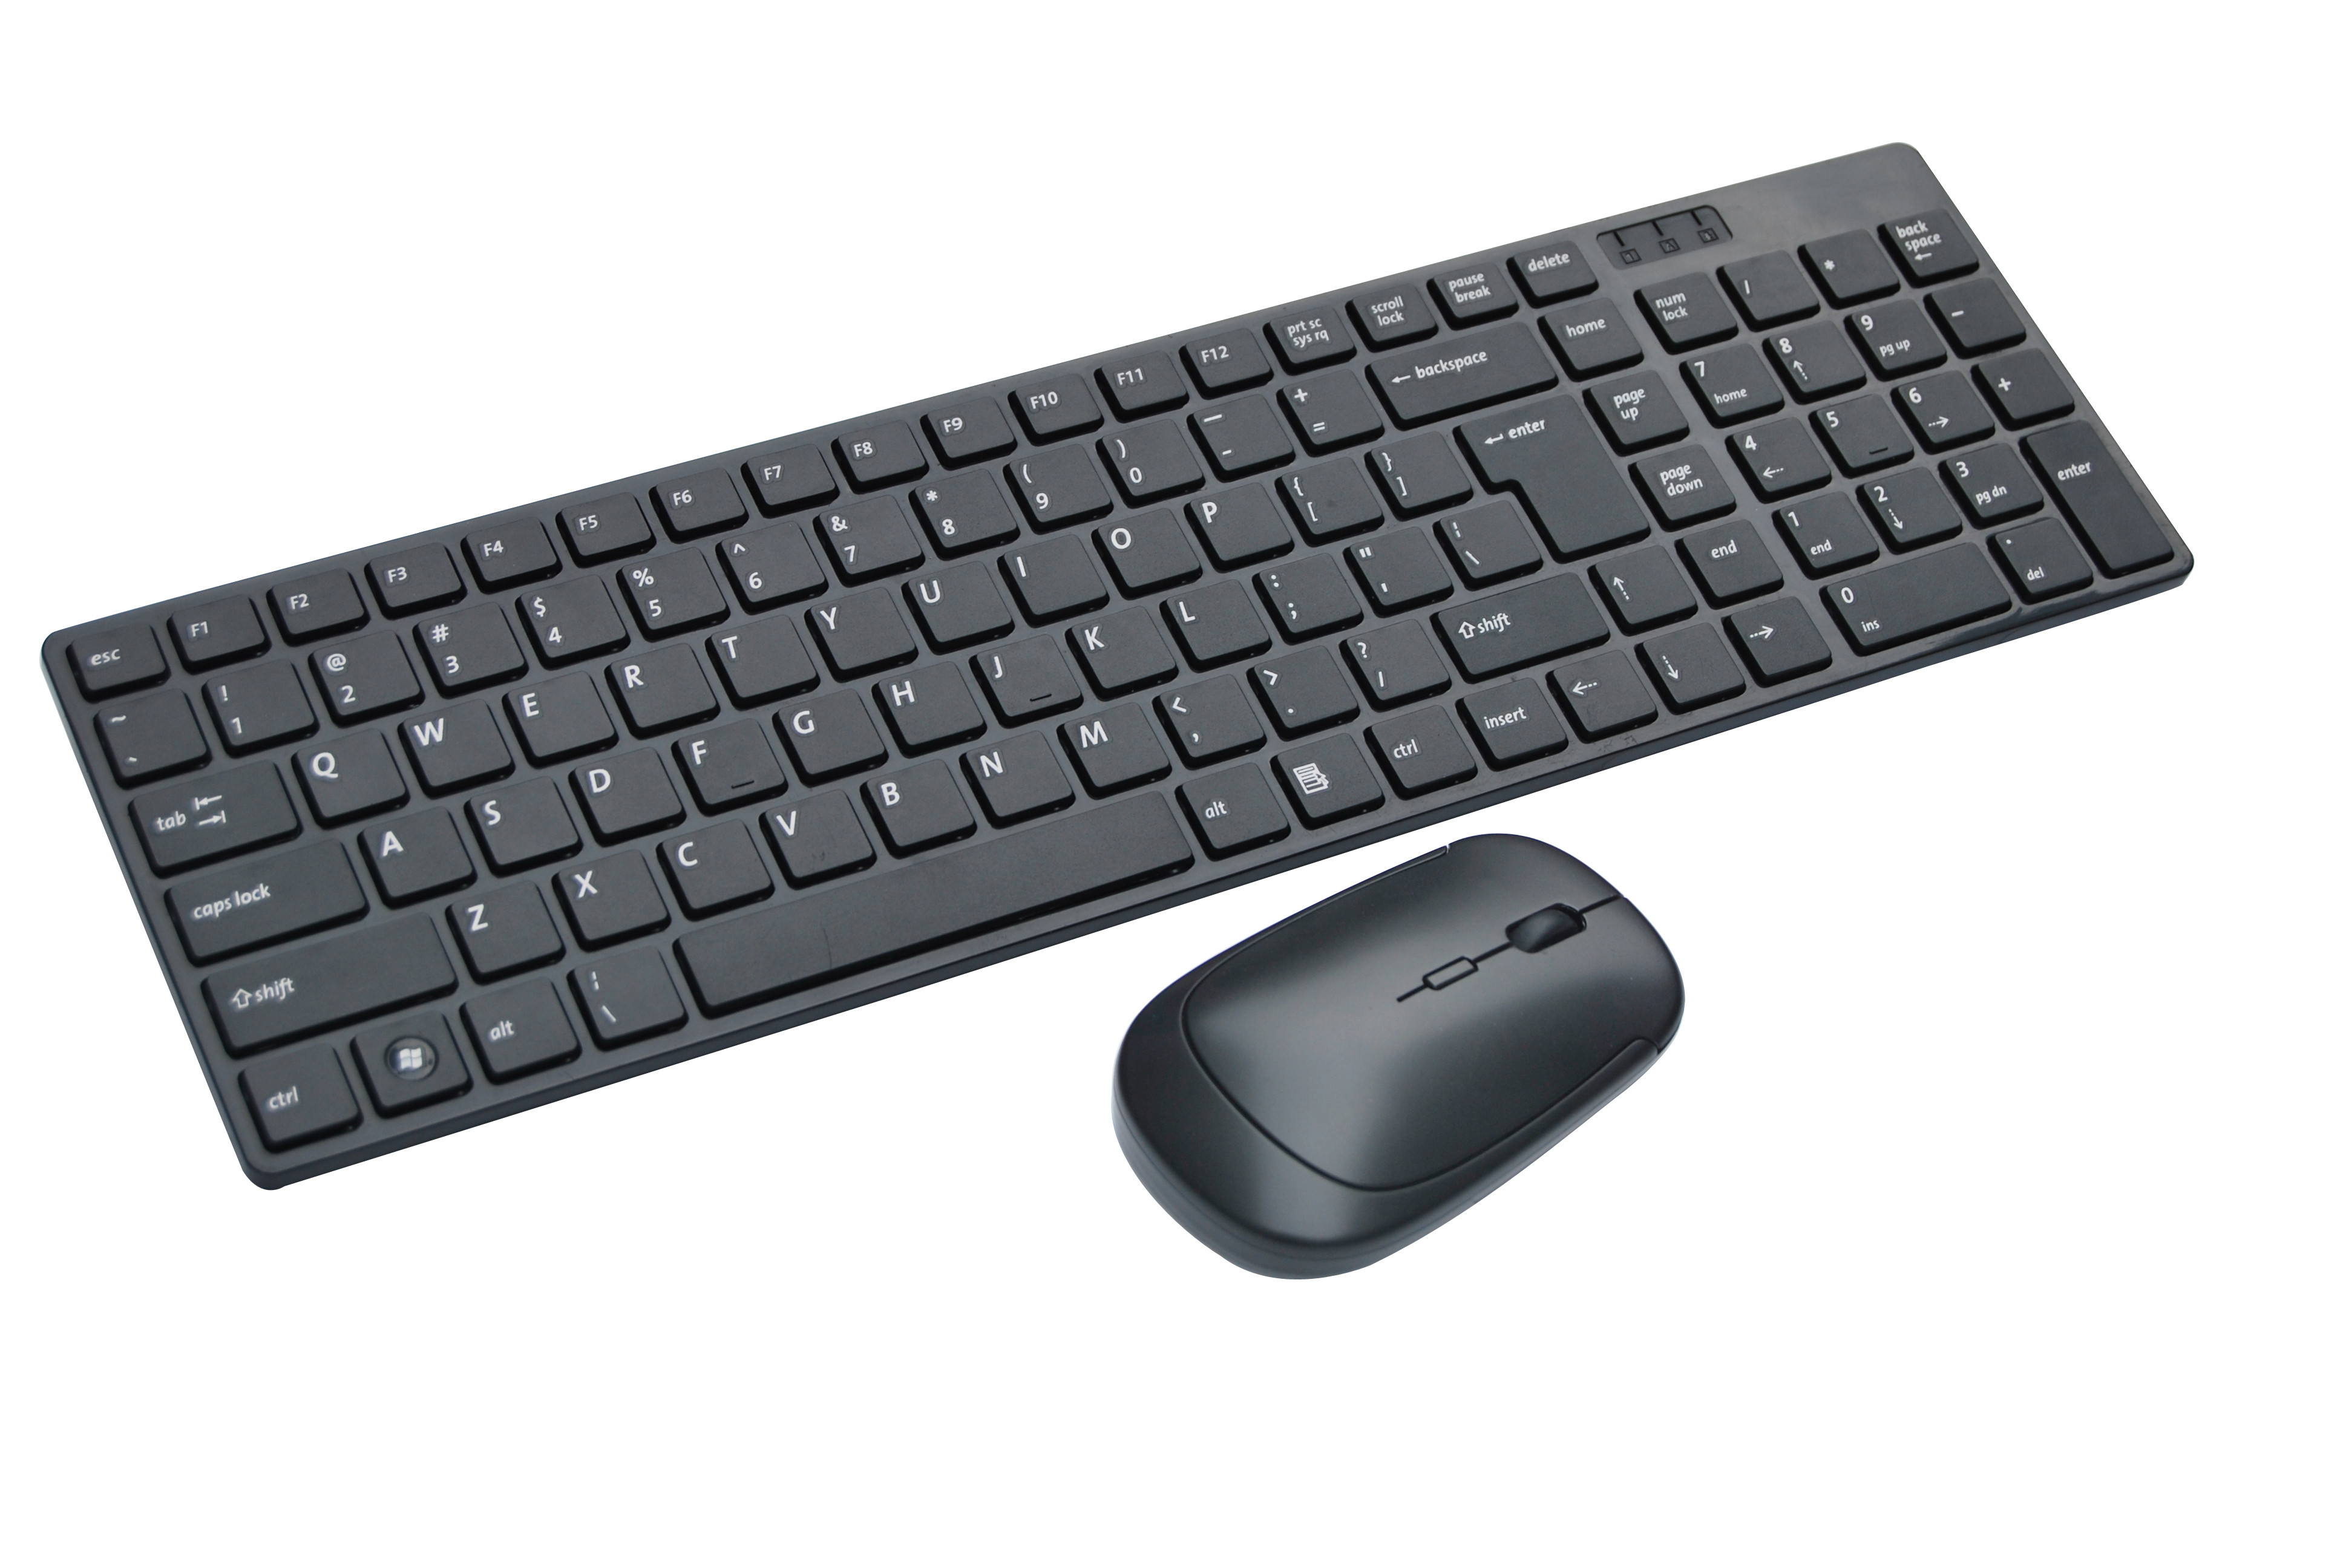 Keyboard And Mouse Combo 2 In 1 Fashion Apple Design Black Color